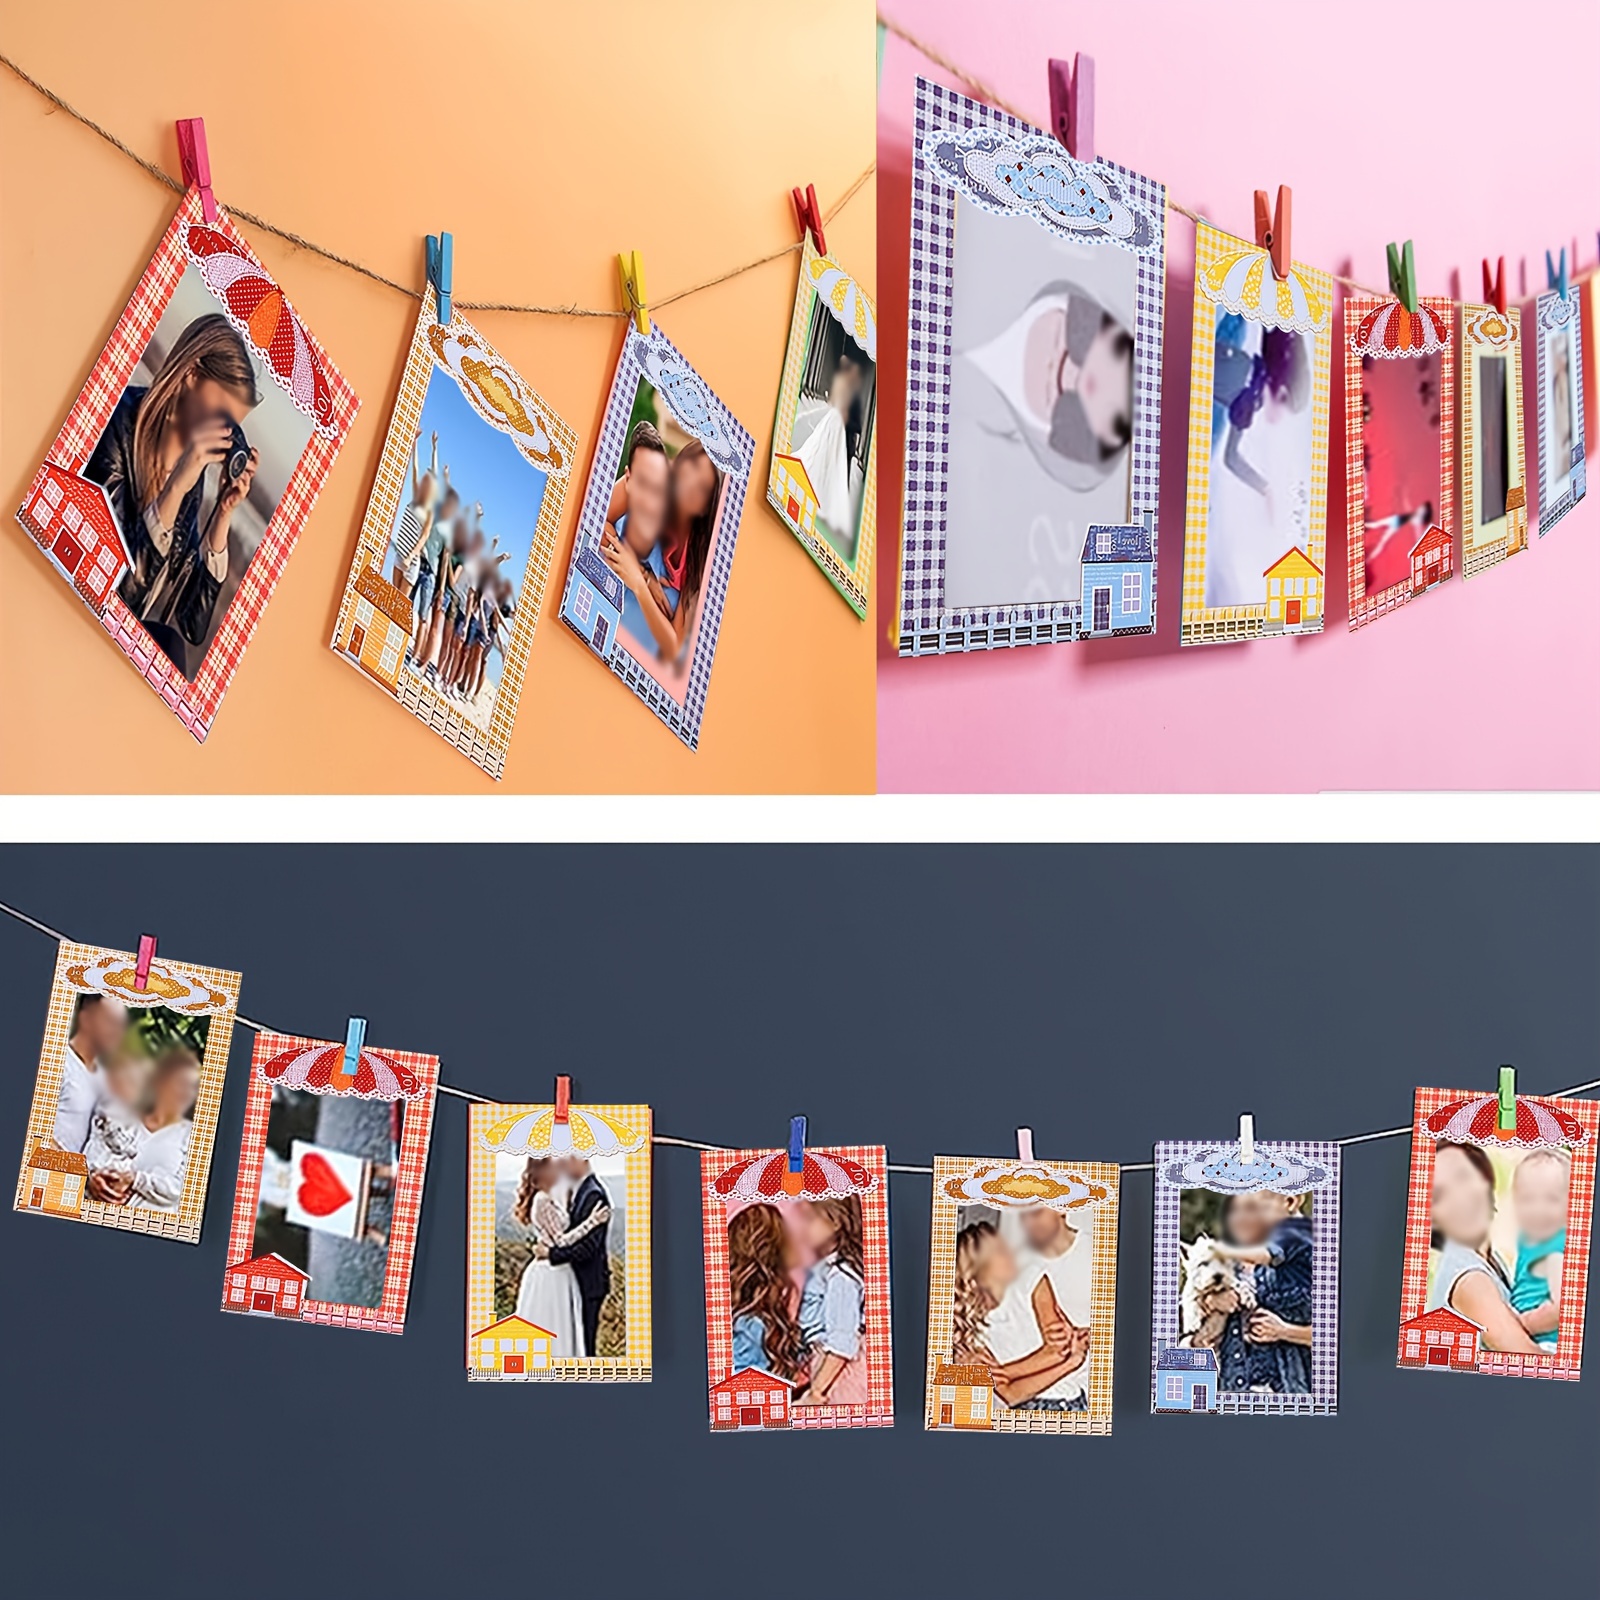 Paper Photo Frame 30 PCS 4 x 6Iinch Wall Paper Frames DIY Picture Frames  Kraft Photo Frame Wall Hanging Cardboard Frames with Clips and String for